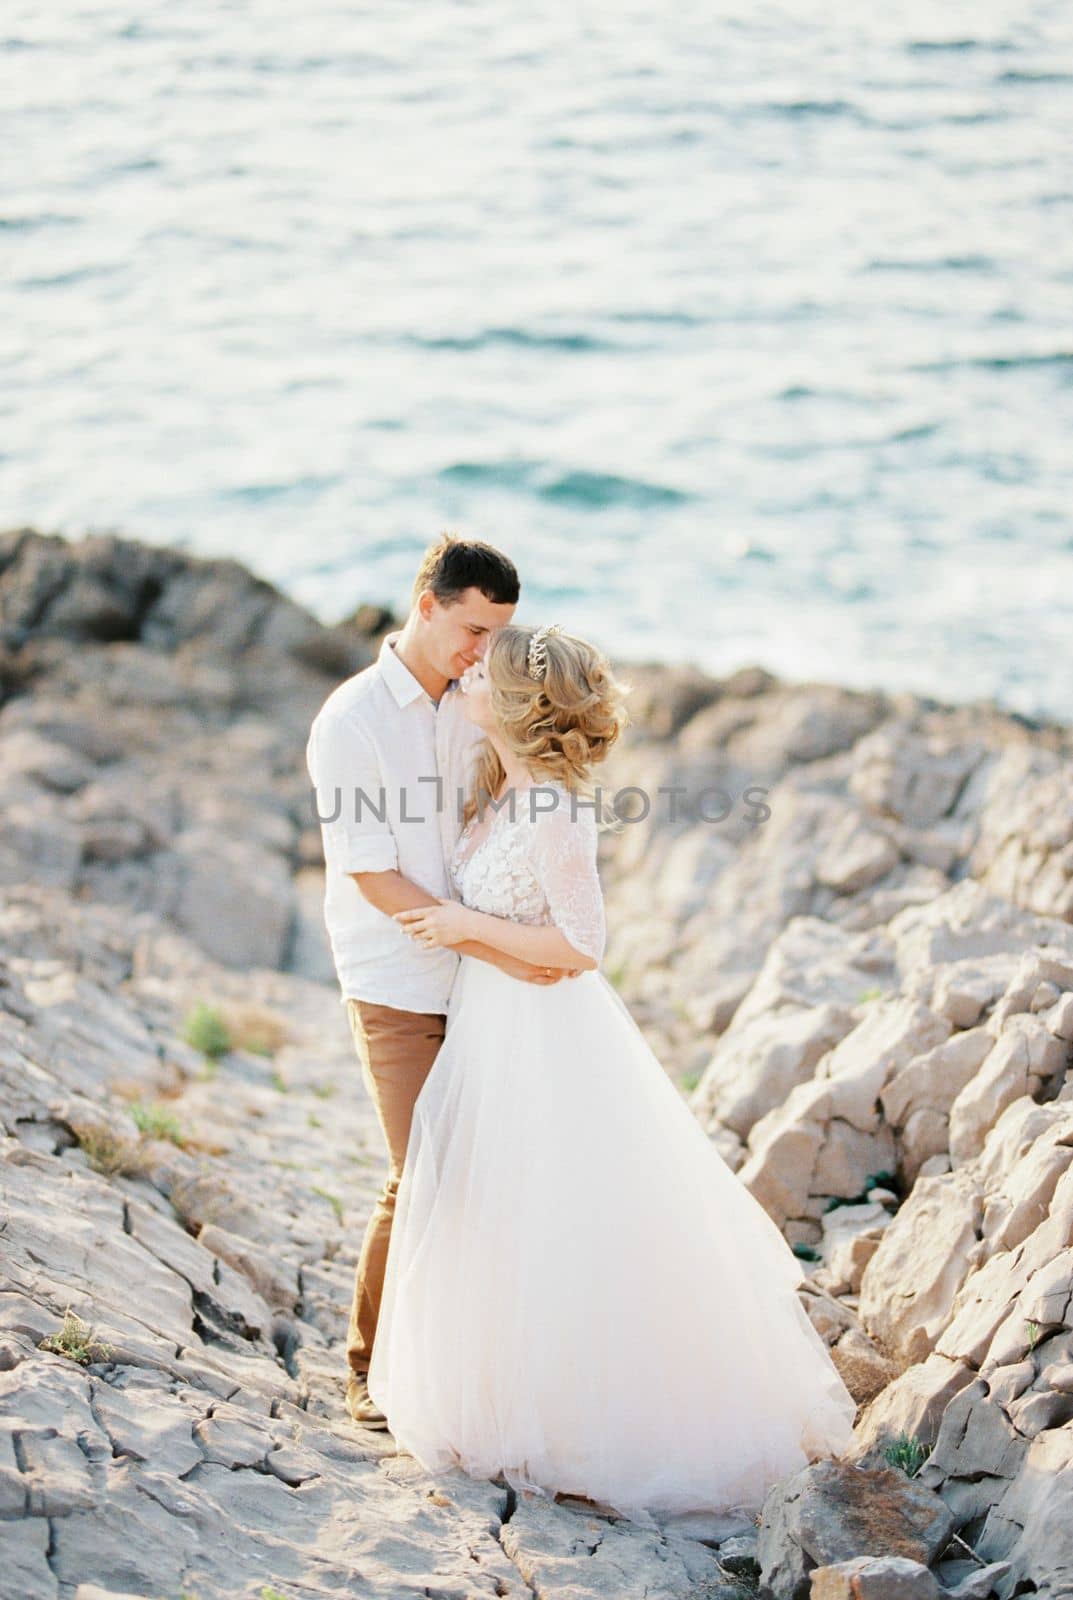 Groom hugs bride in a white lace dress on the rocks by the sea. High quality photo